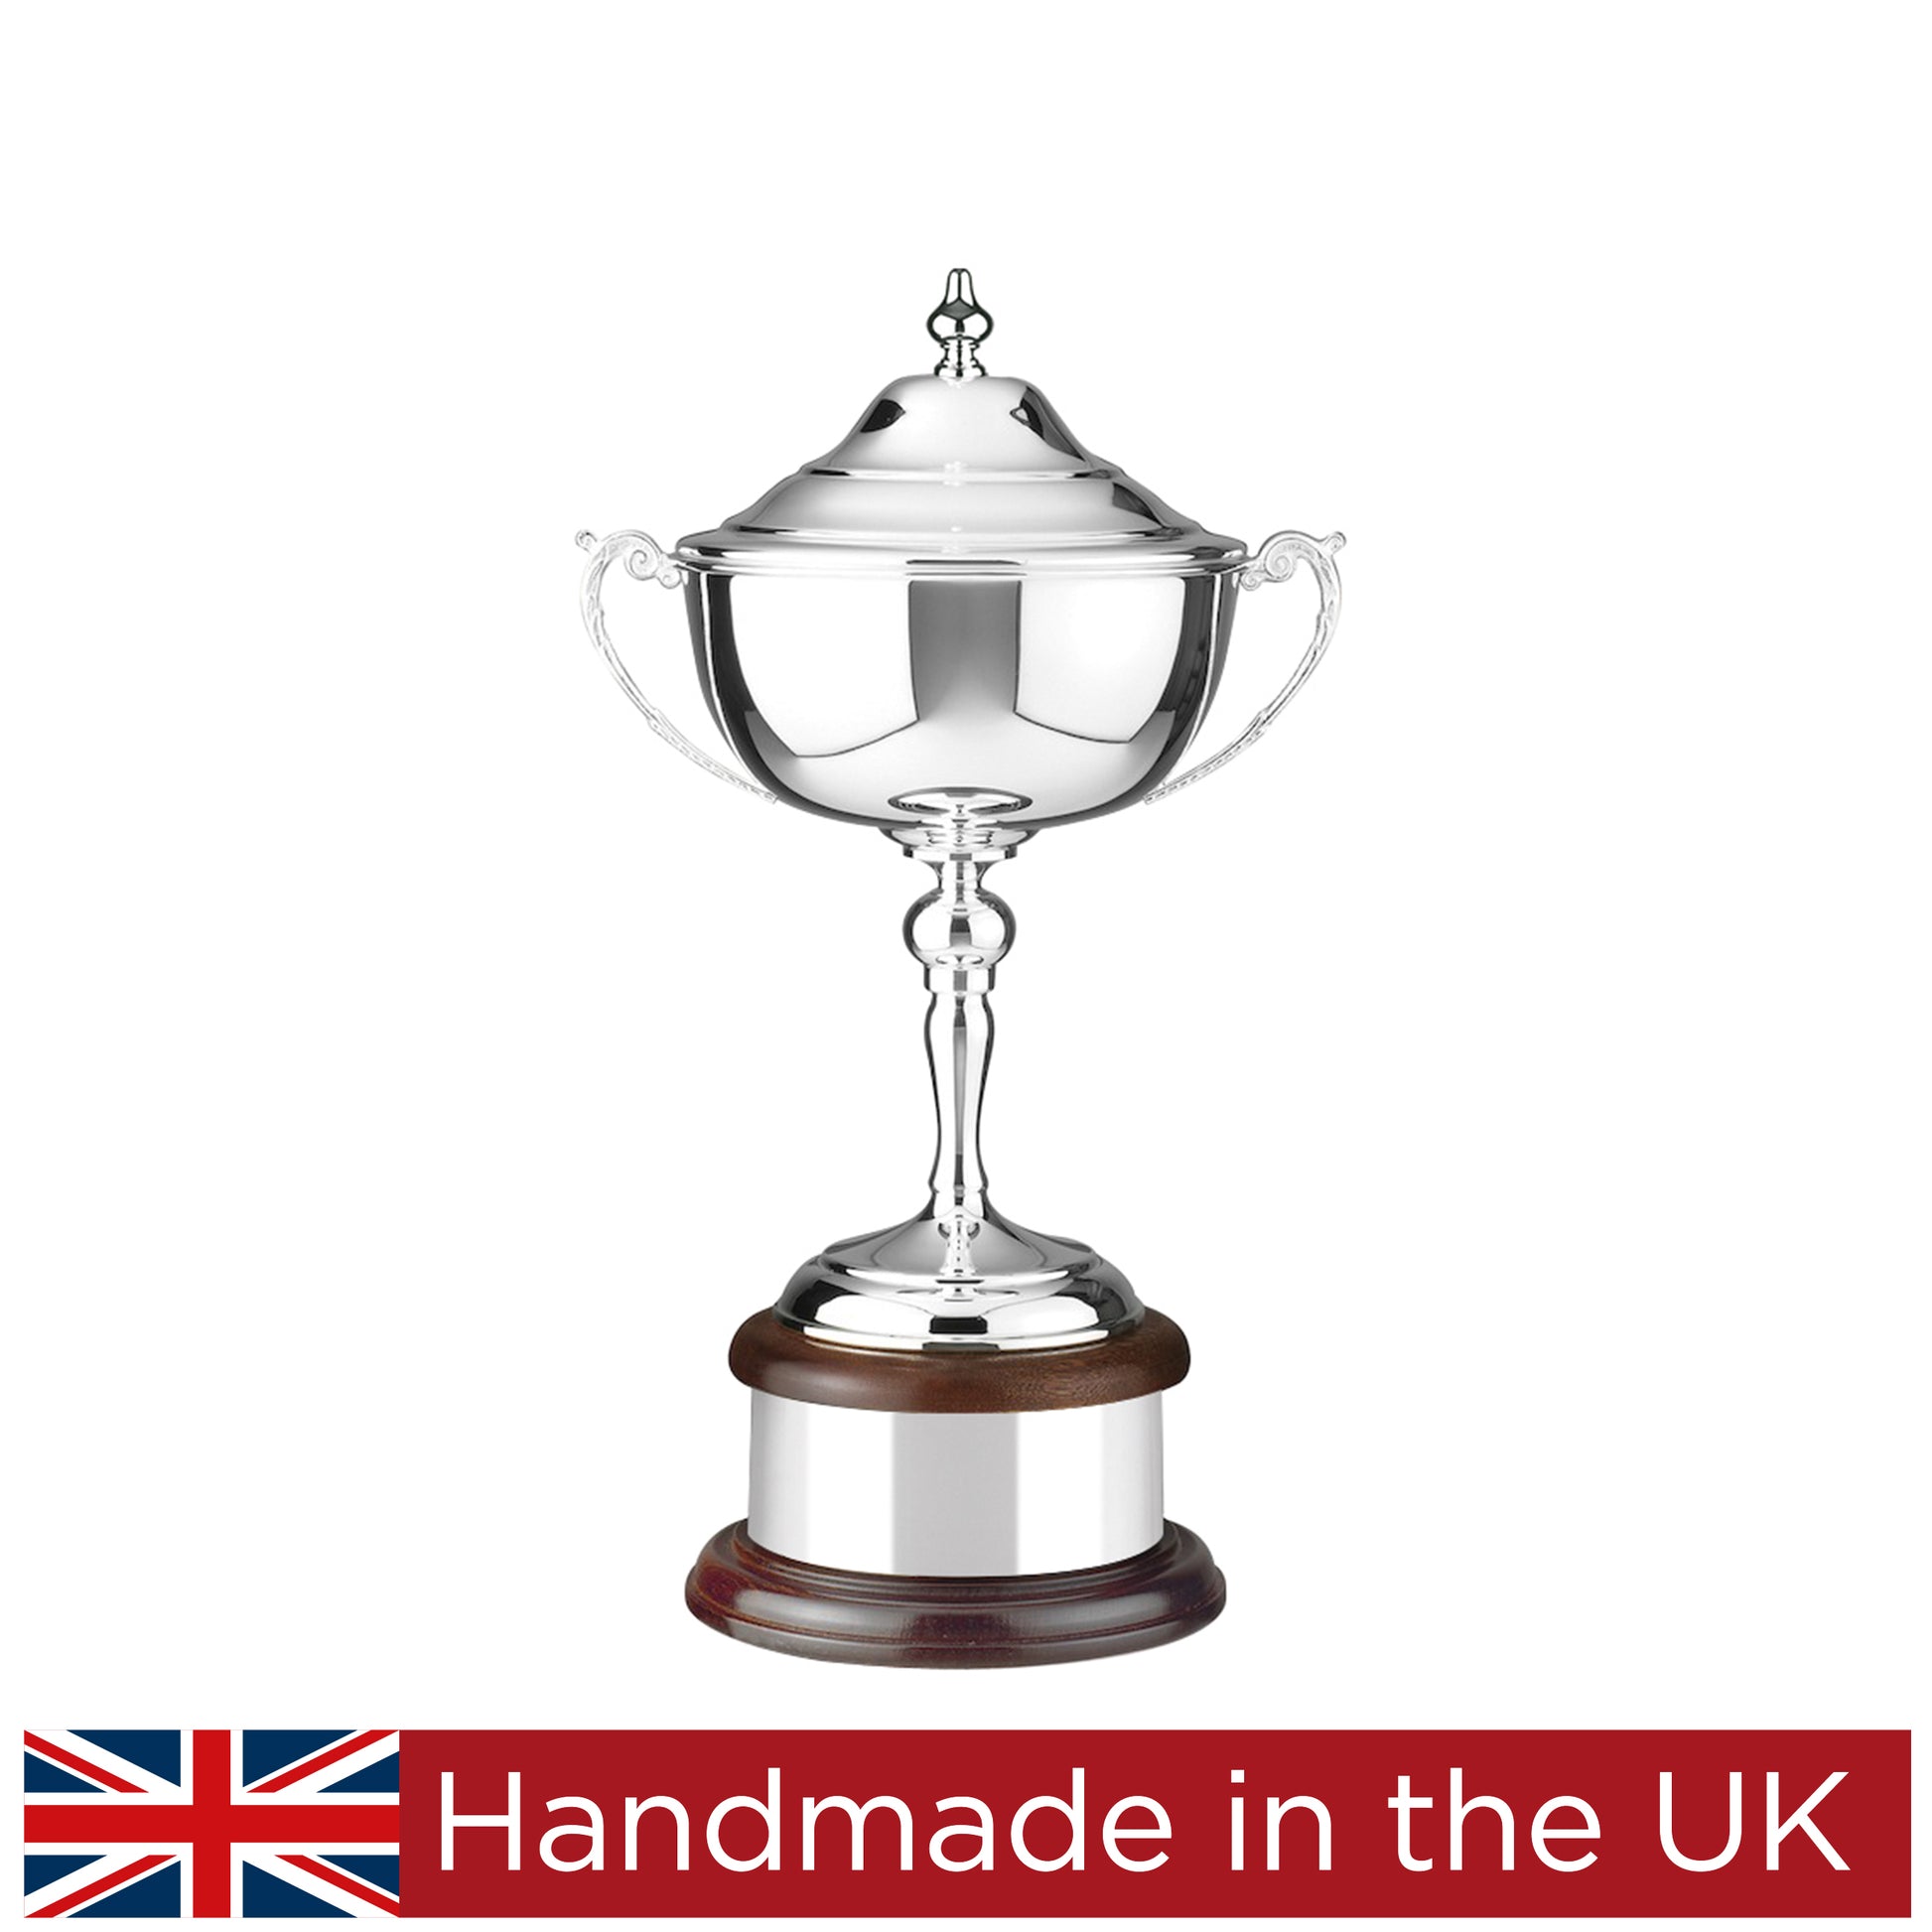 Prestigious Cup - The Winners Cup with Lid by Gaudio Awards